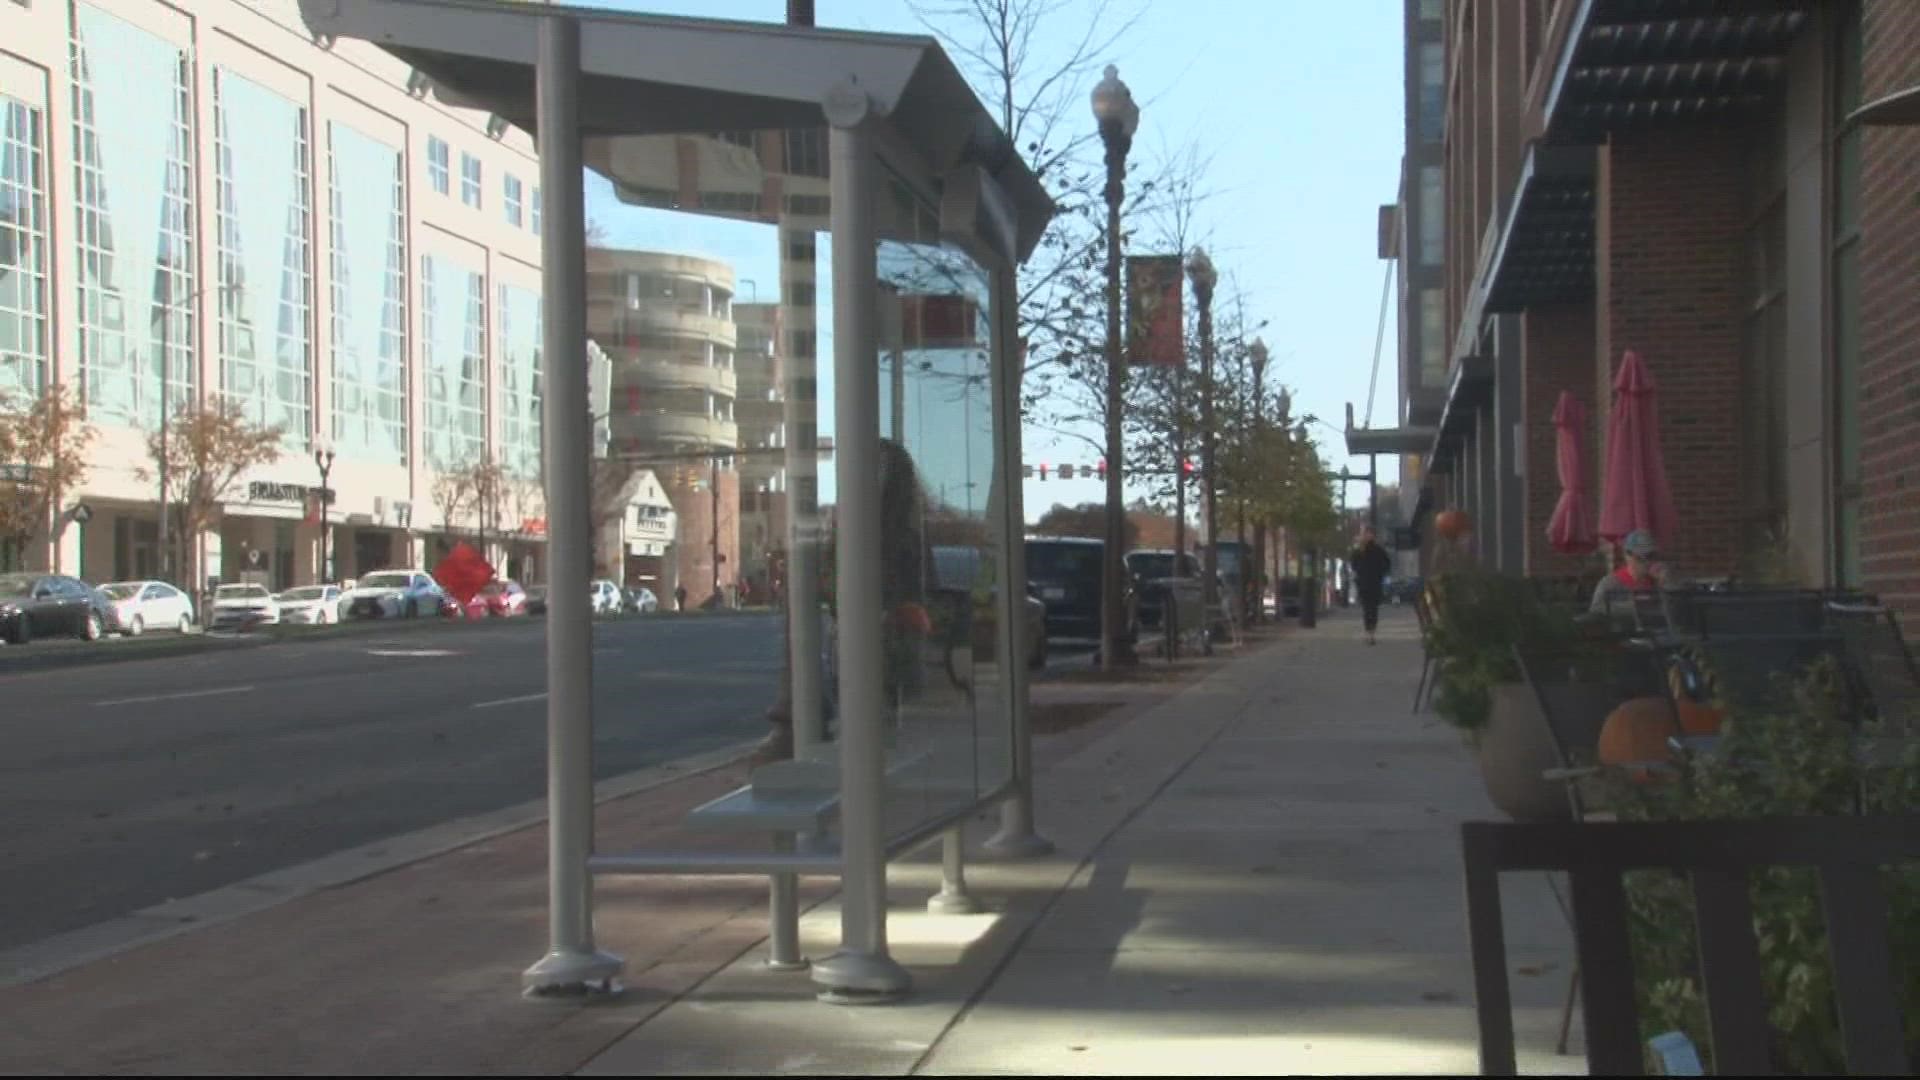 The plan to add the new bus stop has been in place since 2015.